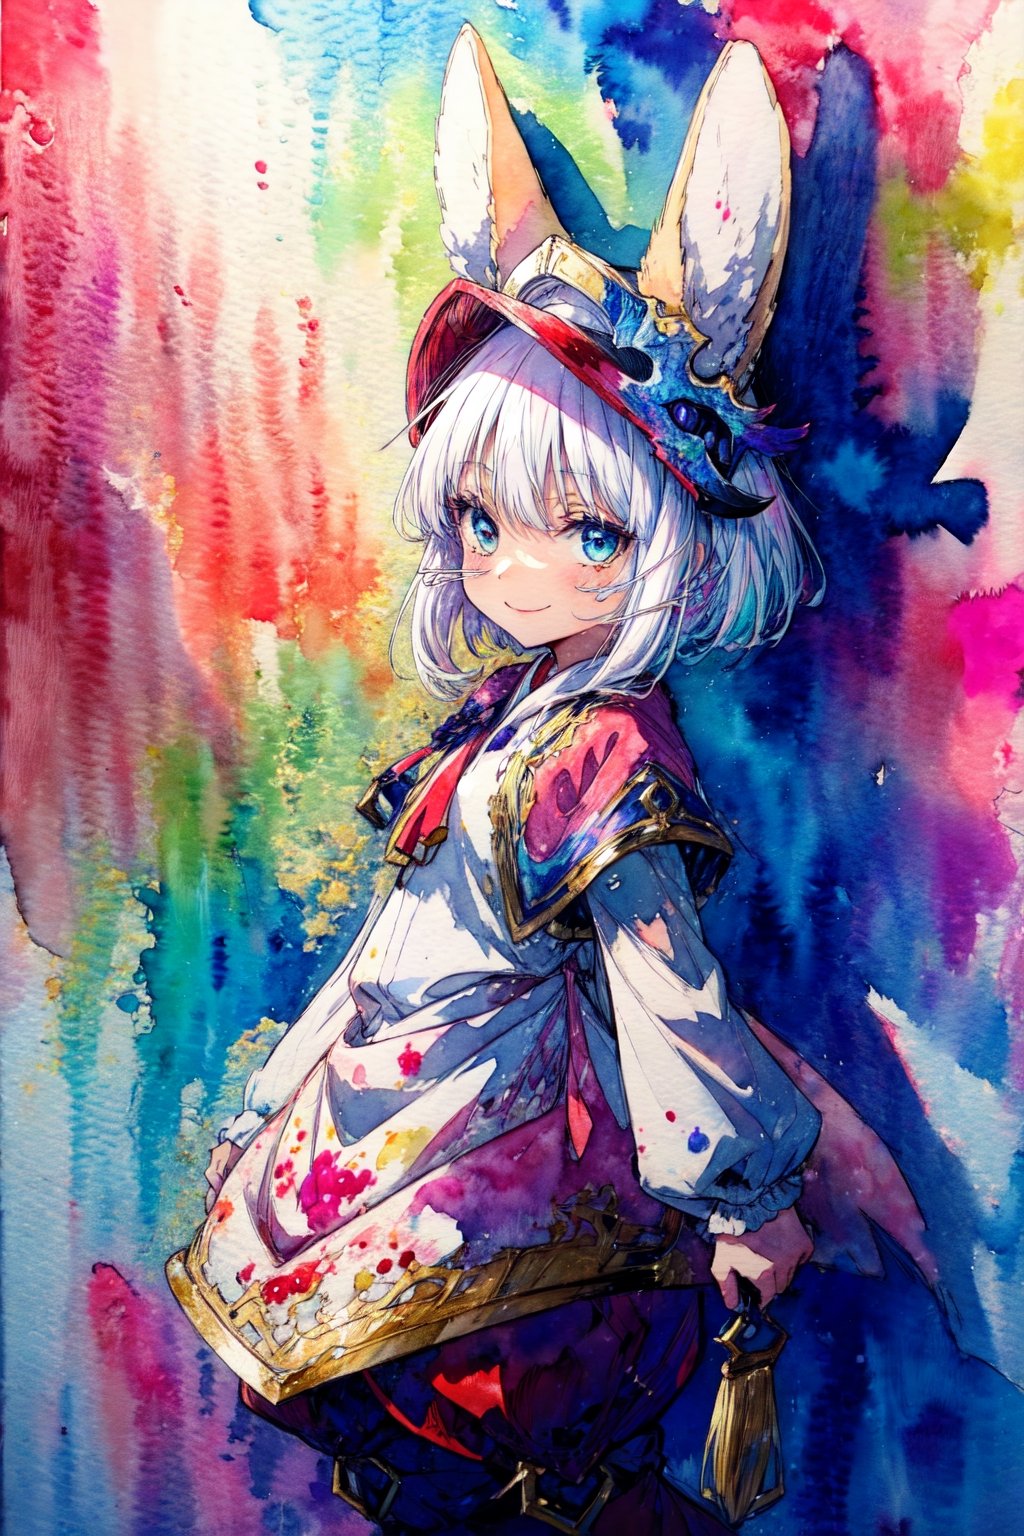 wamudraws, itsunknownanon, pixelsketcher, dimwitdog, canaryprimary, sicmop, (((thick outlines, watercolor:1.1))) BREAK, outdoors, market, (detailed background:1.1), standing BREAK nanachi, narehate, white hair, horned helmet, headdress, pants, smile, looking at viewer